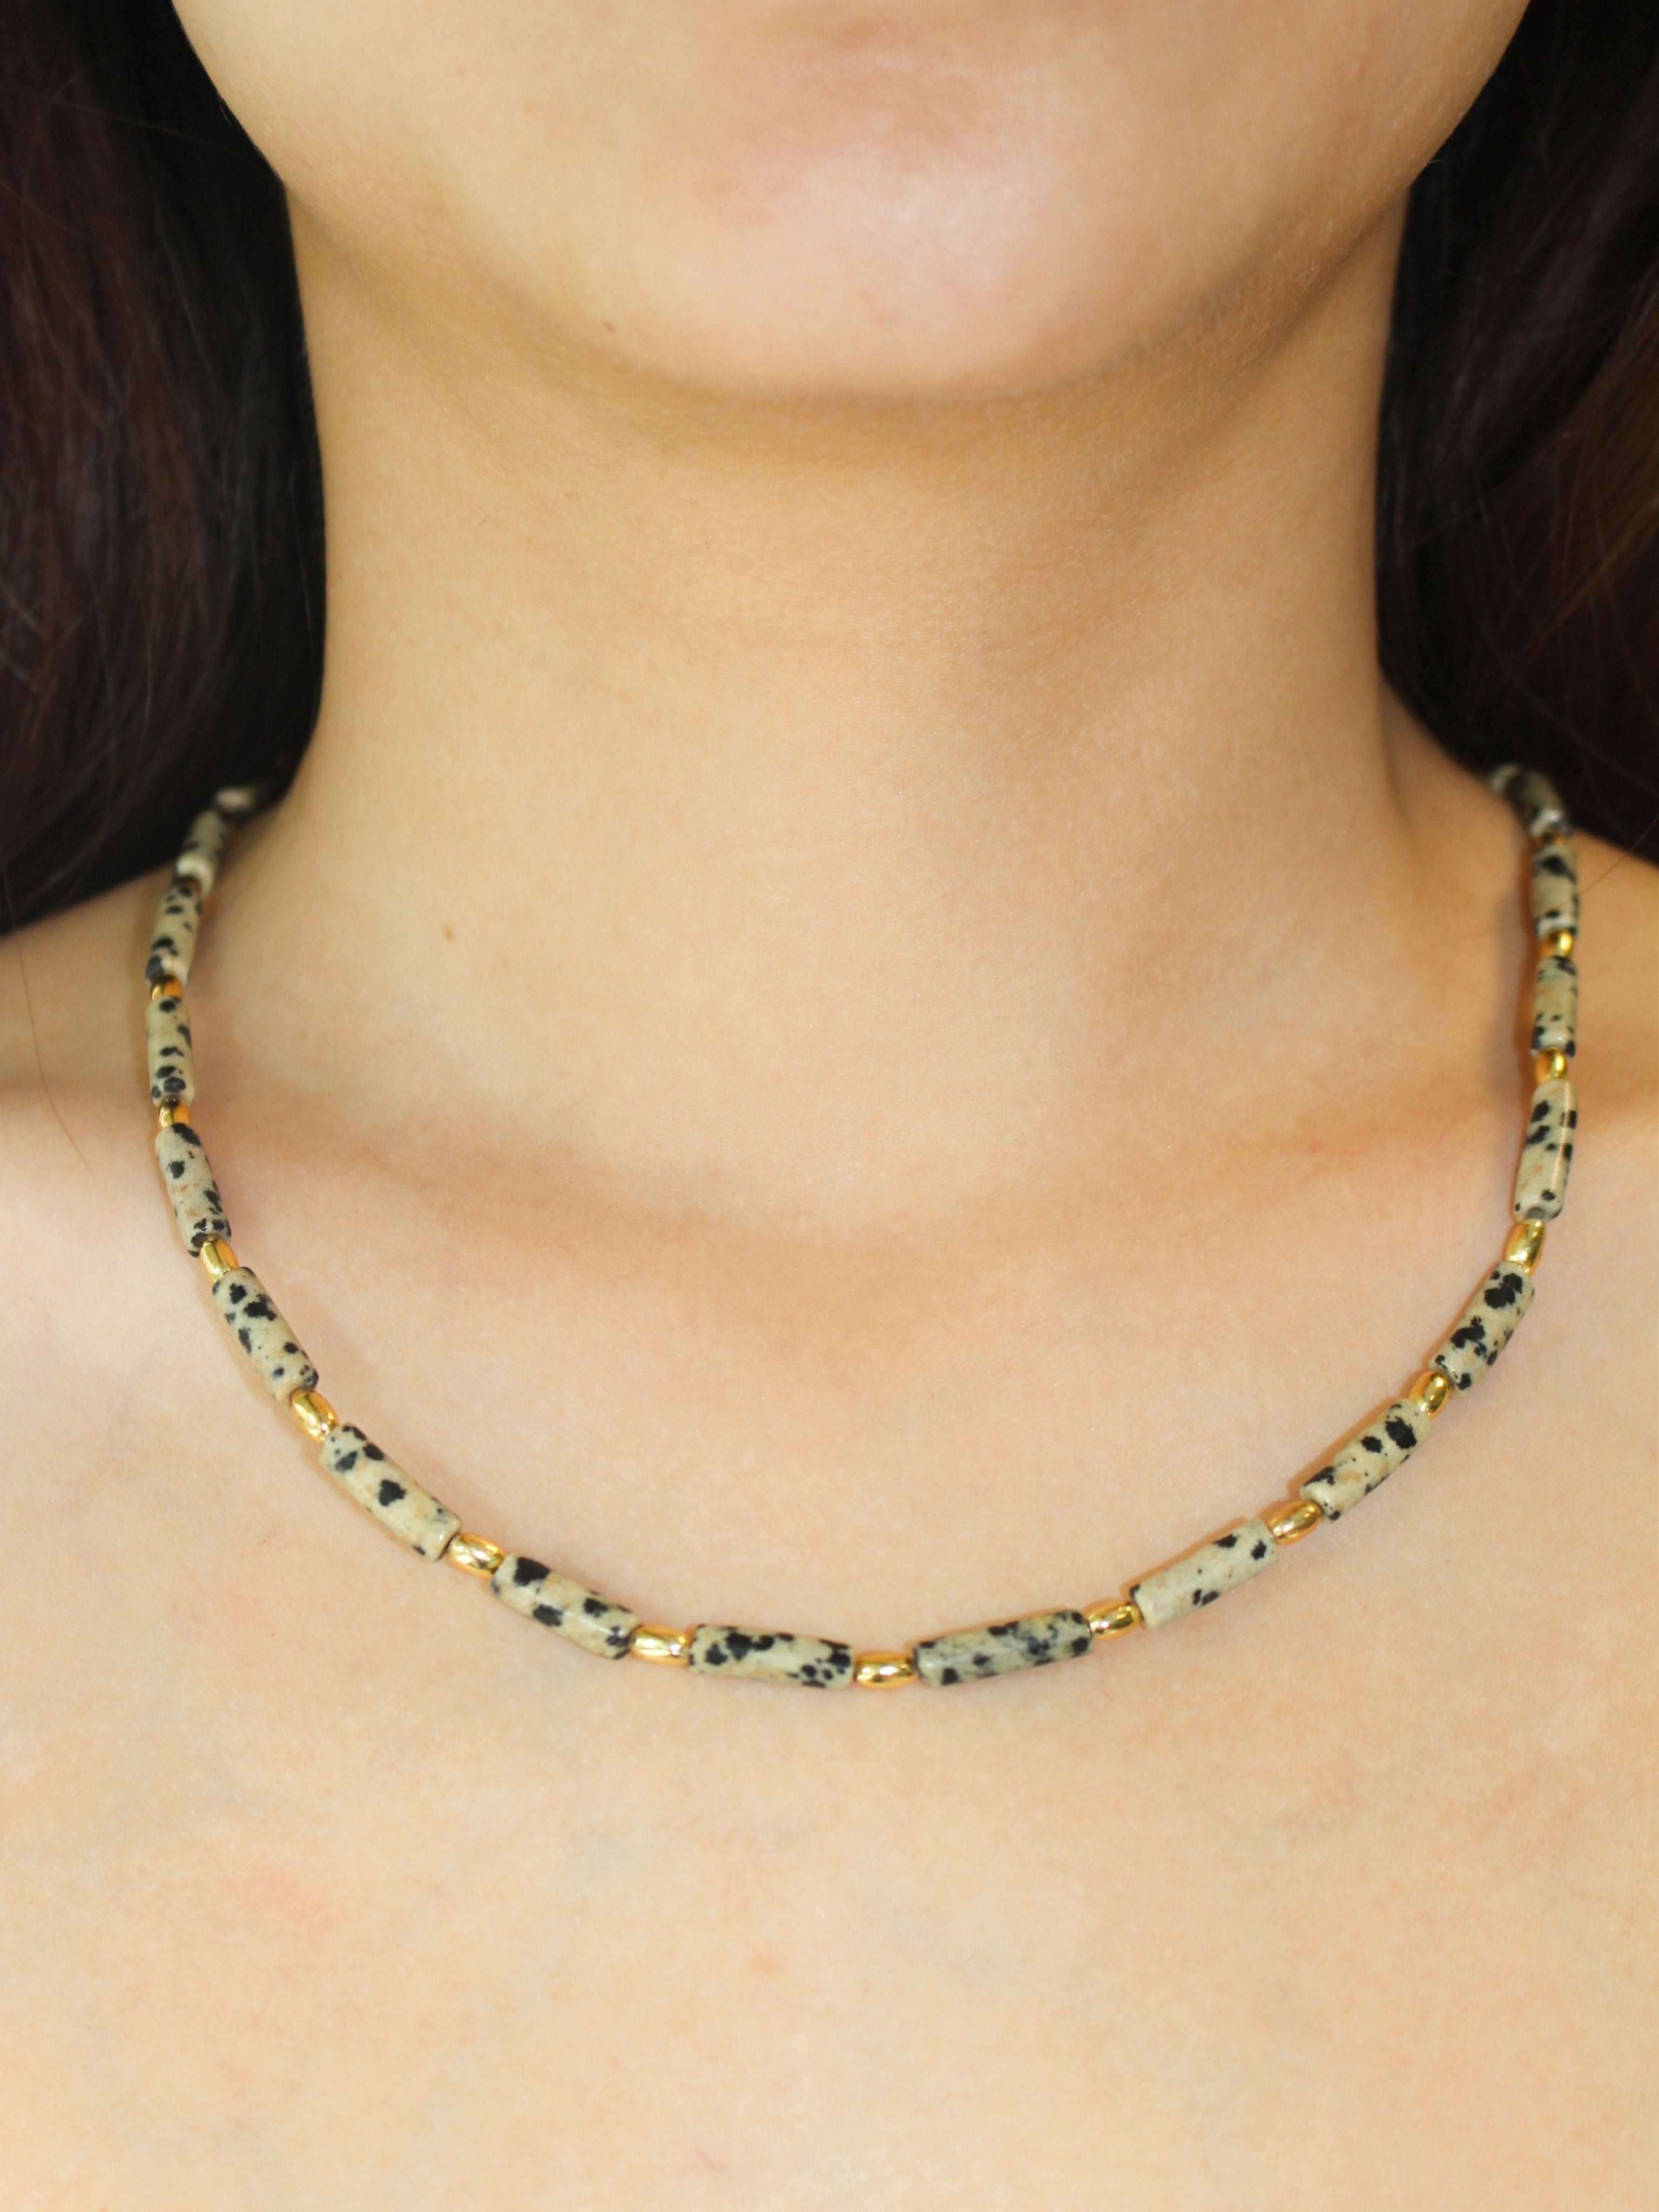 wearing Handmade Speckled Stone Bead Necklace